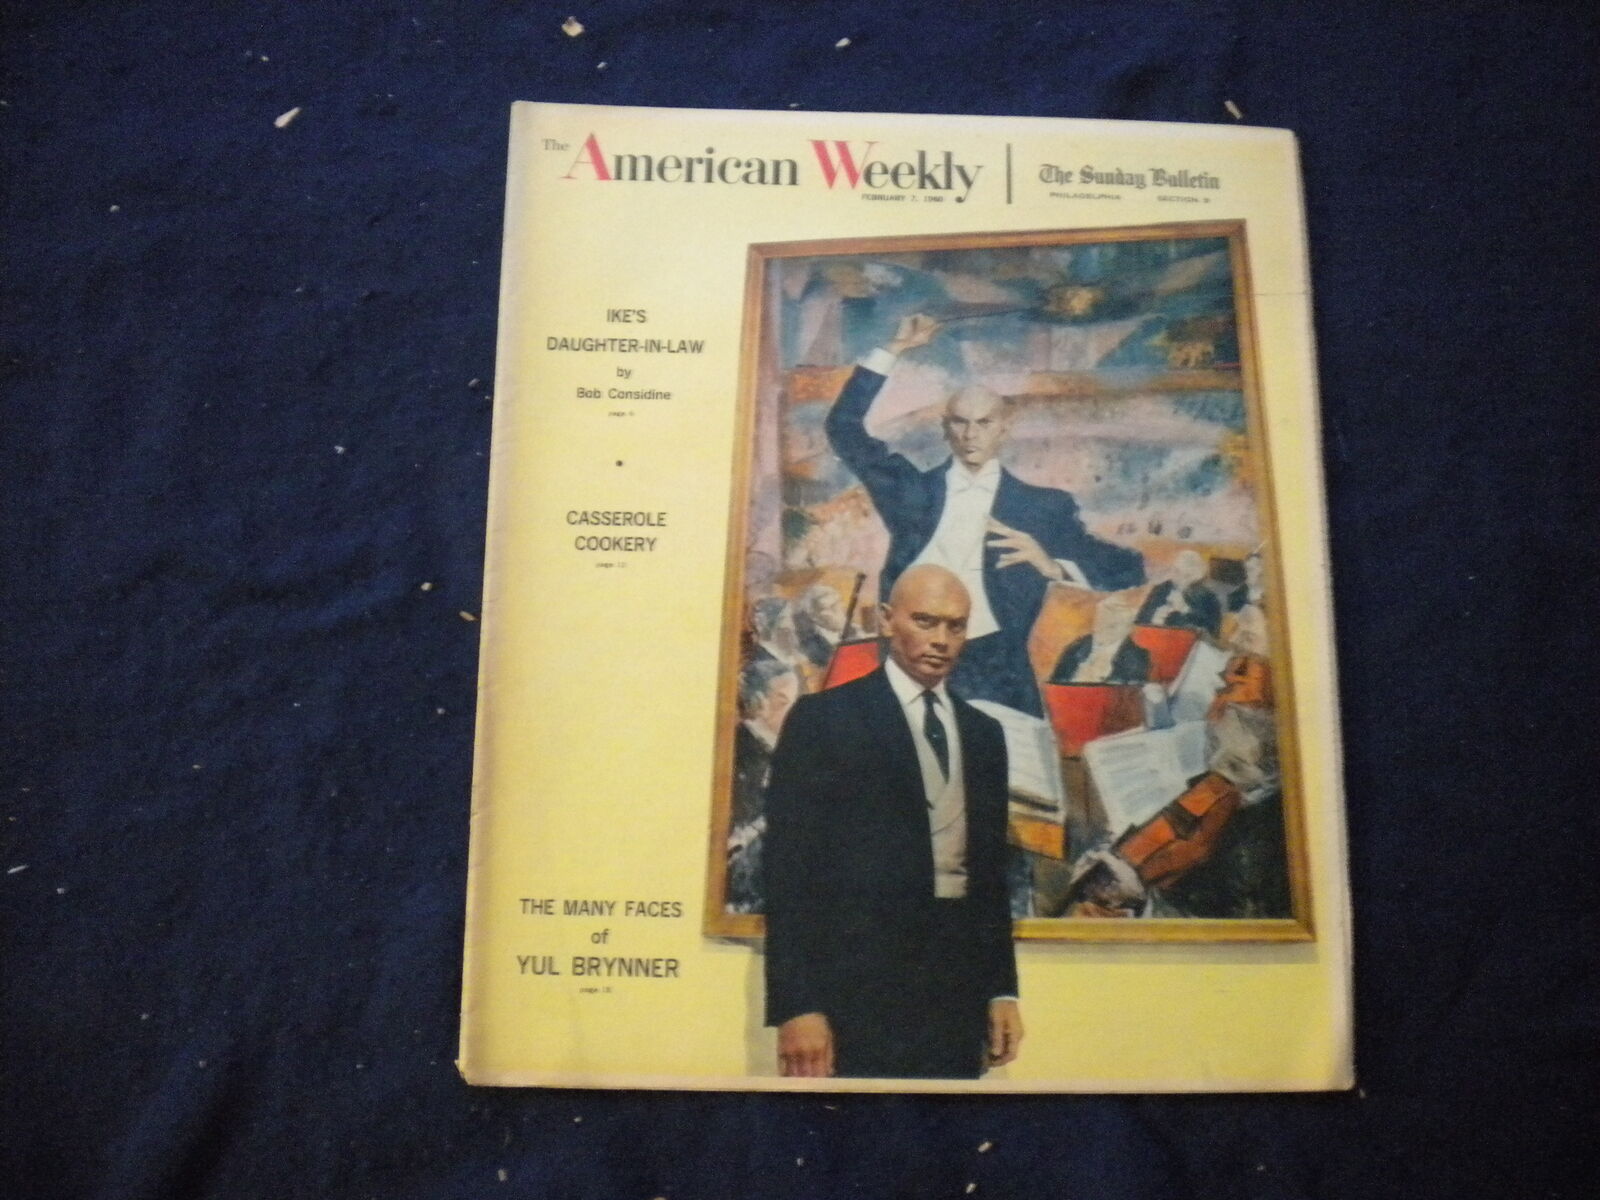 1960 FEBRUARY 7 THE AMERICAN WEEKLY NEWSPAPER SECTION - YUL BRYNNER - NP 6017